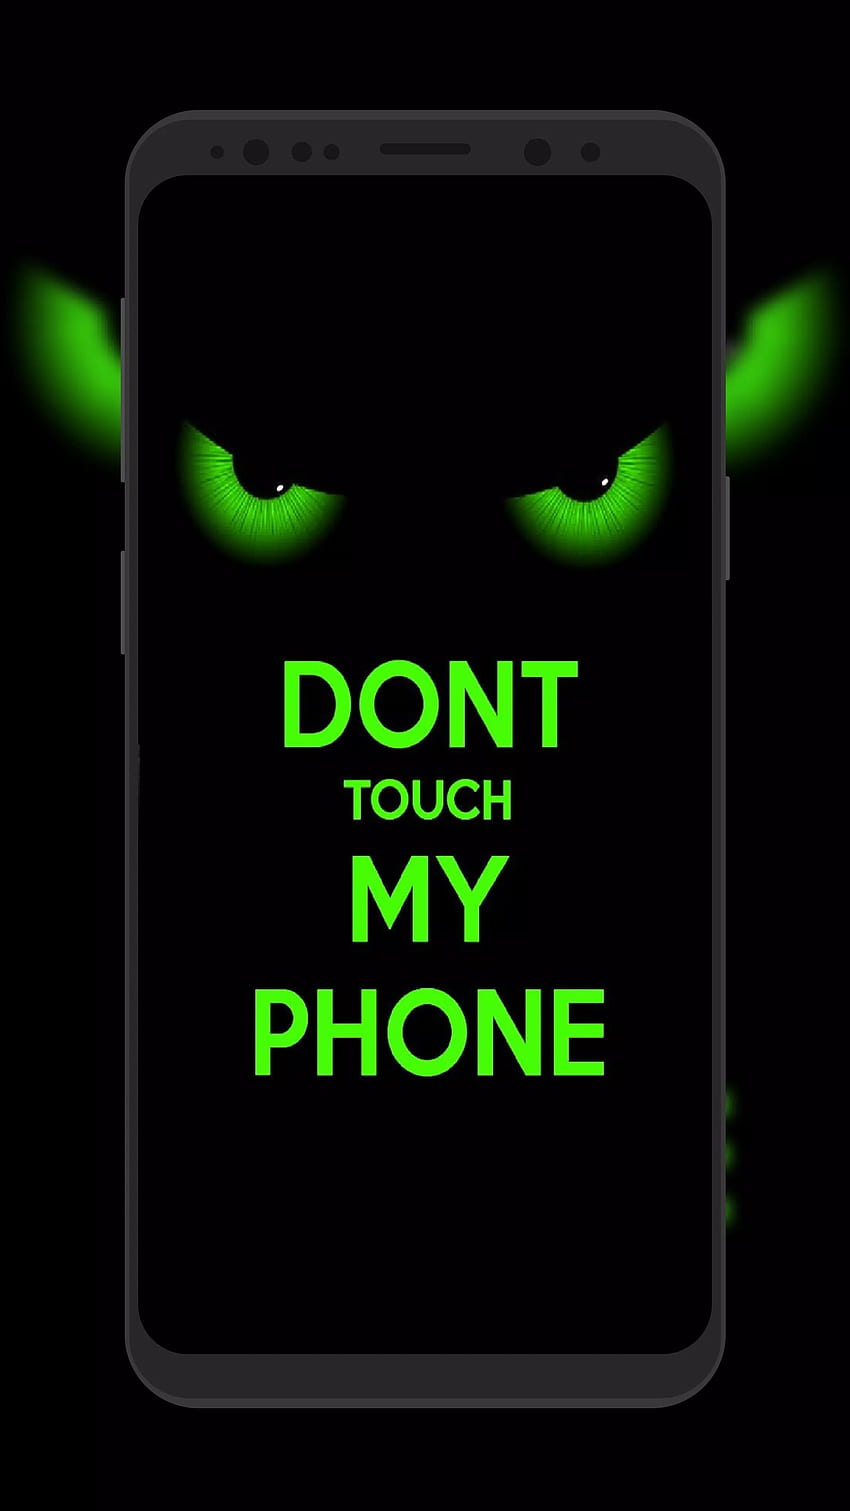 Don't Touch My Phone Live、Angry Green Eyes HD電話の壁紙